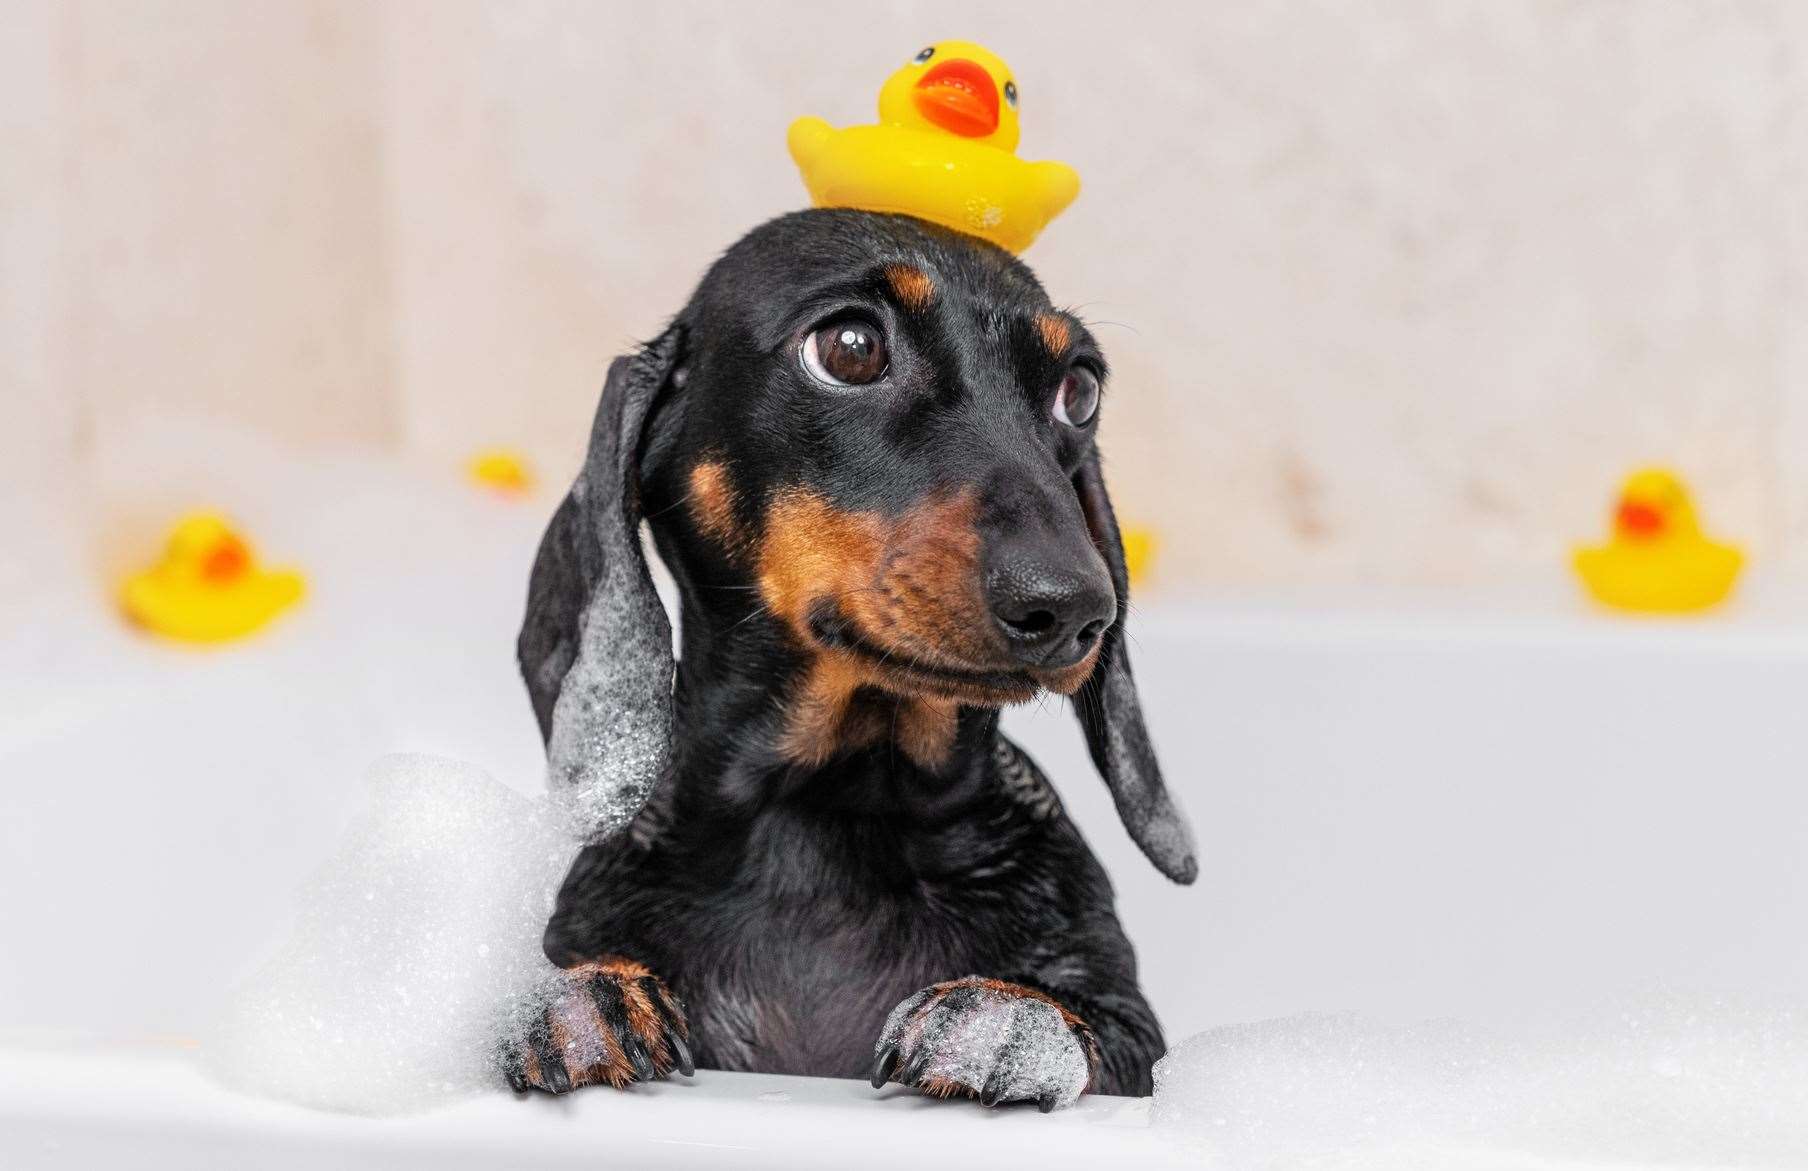 The dachshund has even been turned into its own Easter egg by M&S. Image: iStock.